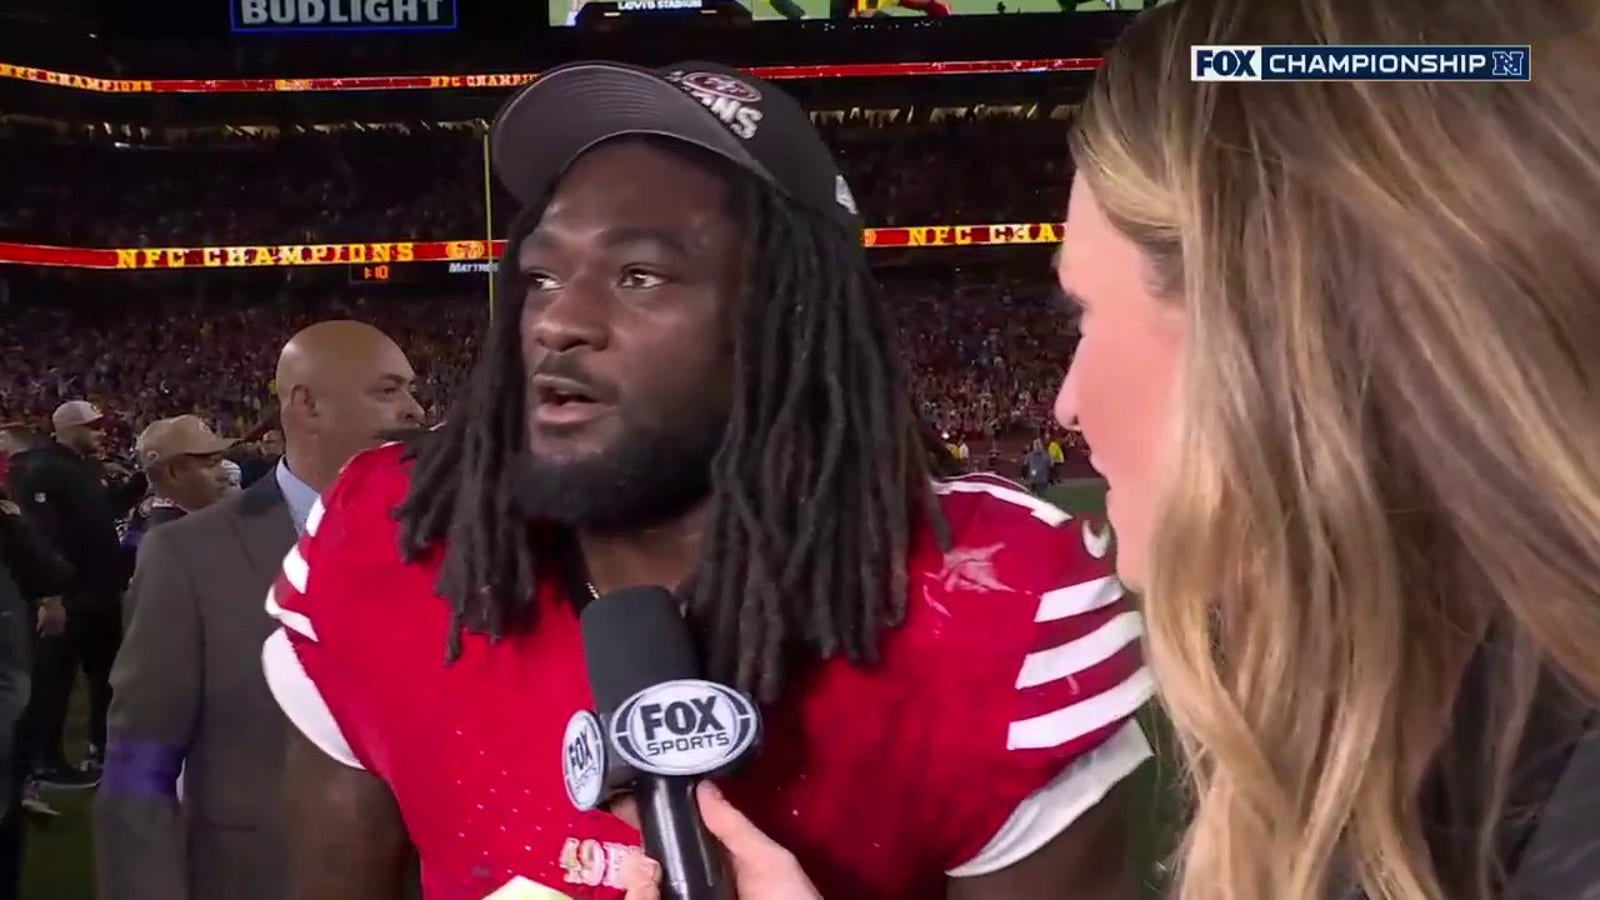 'A ladybug landed on my shoe' – Brandon Aiyuk on incredible catch, 49ers clinching Super Bowl appearance 